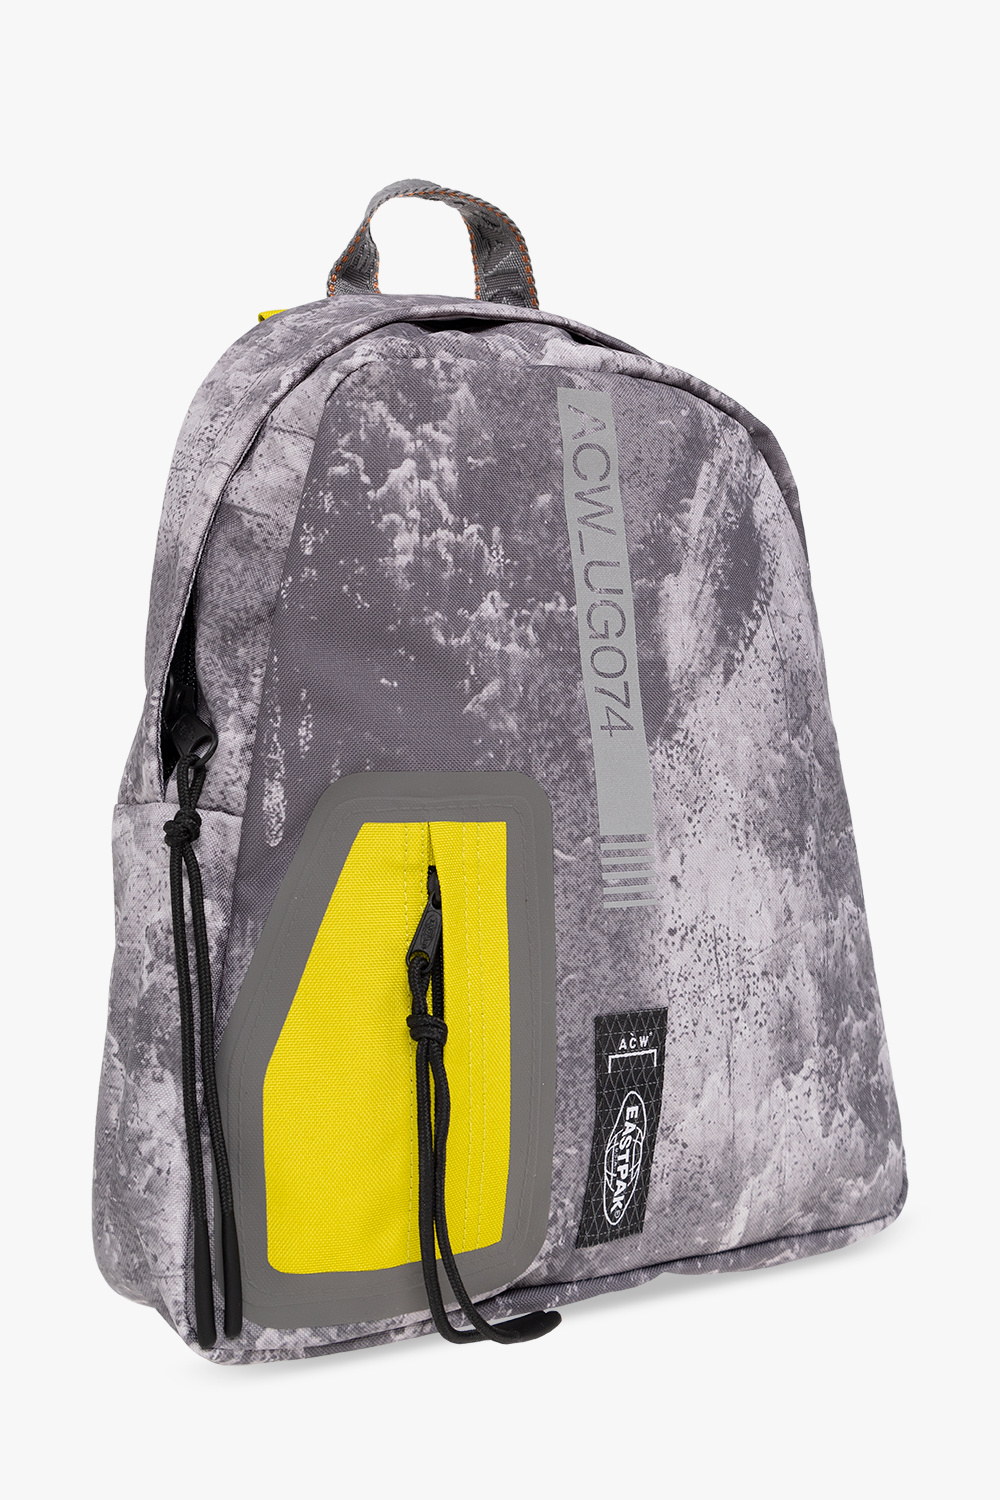 A-COLD-WALL* embroidered logo elephant backpack